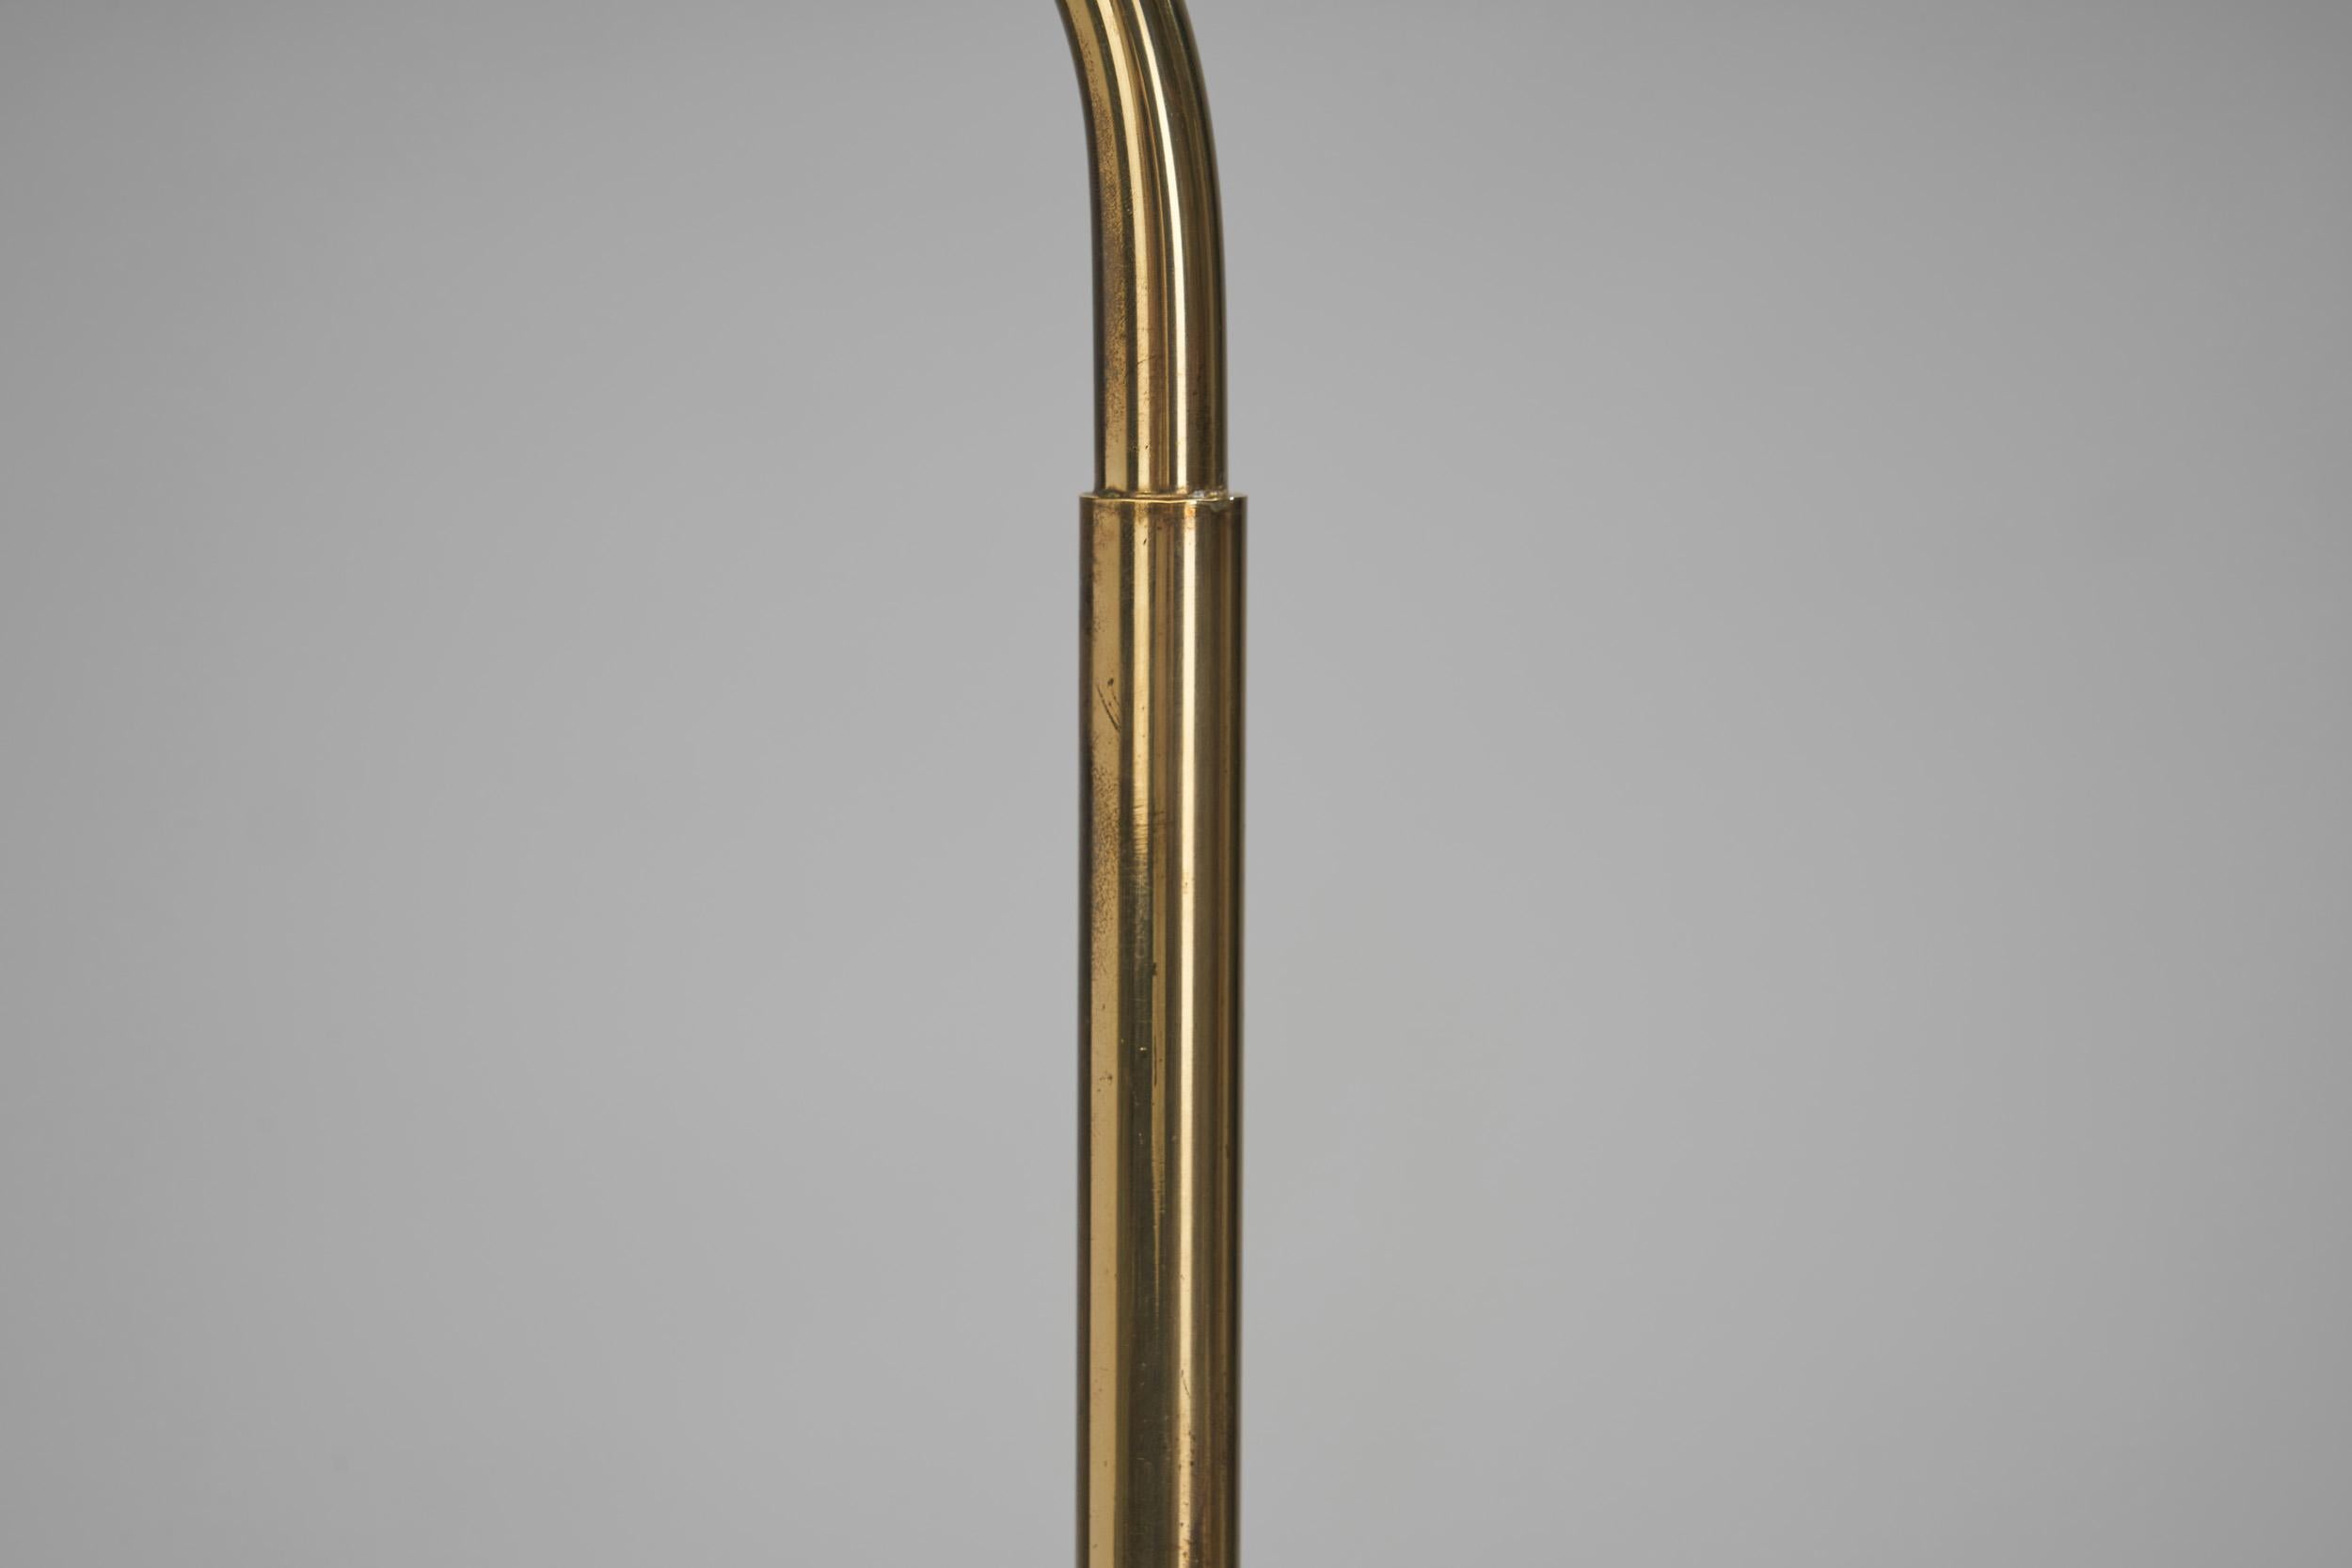 Jan Wickelgren Curved Brass Table Lamp for Aneta Belysning AB, Sweden, 1970s For Sale 11